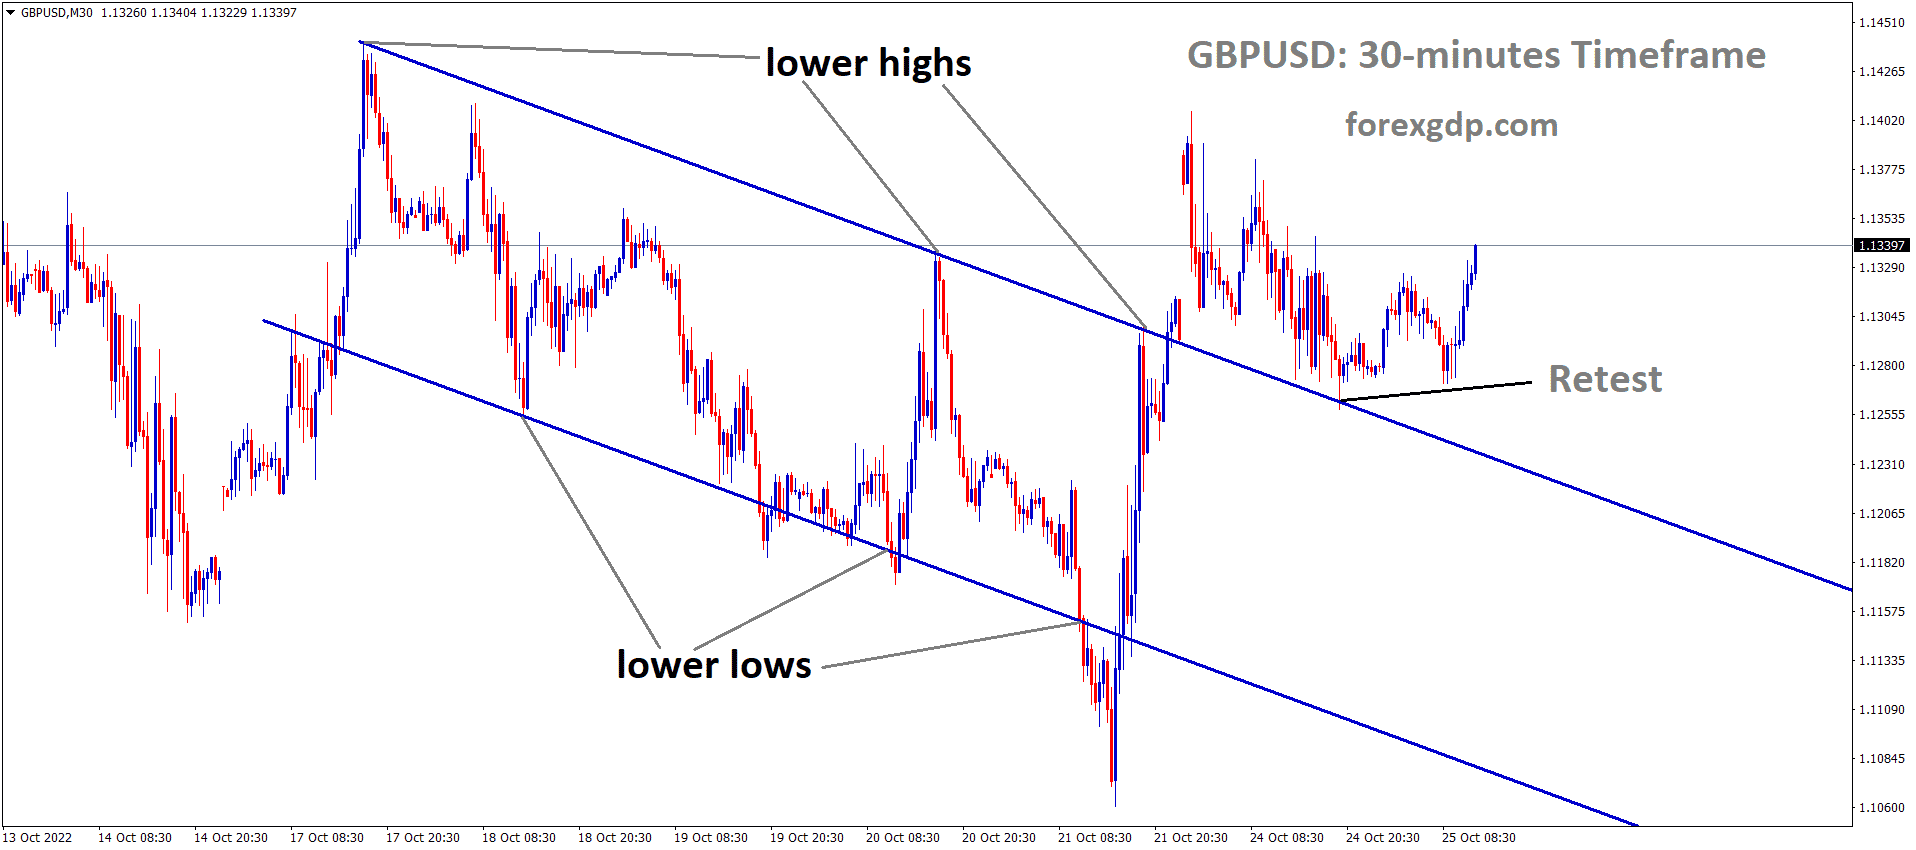 GBPUSD has broken the Descending channel and the market has retested and rebounded from the broken area of the channel